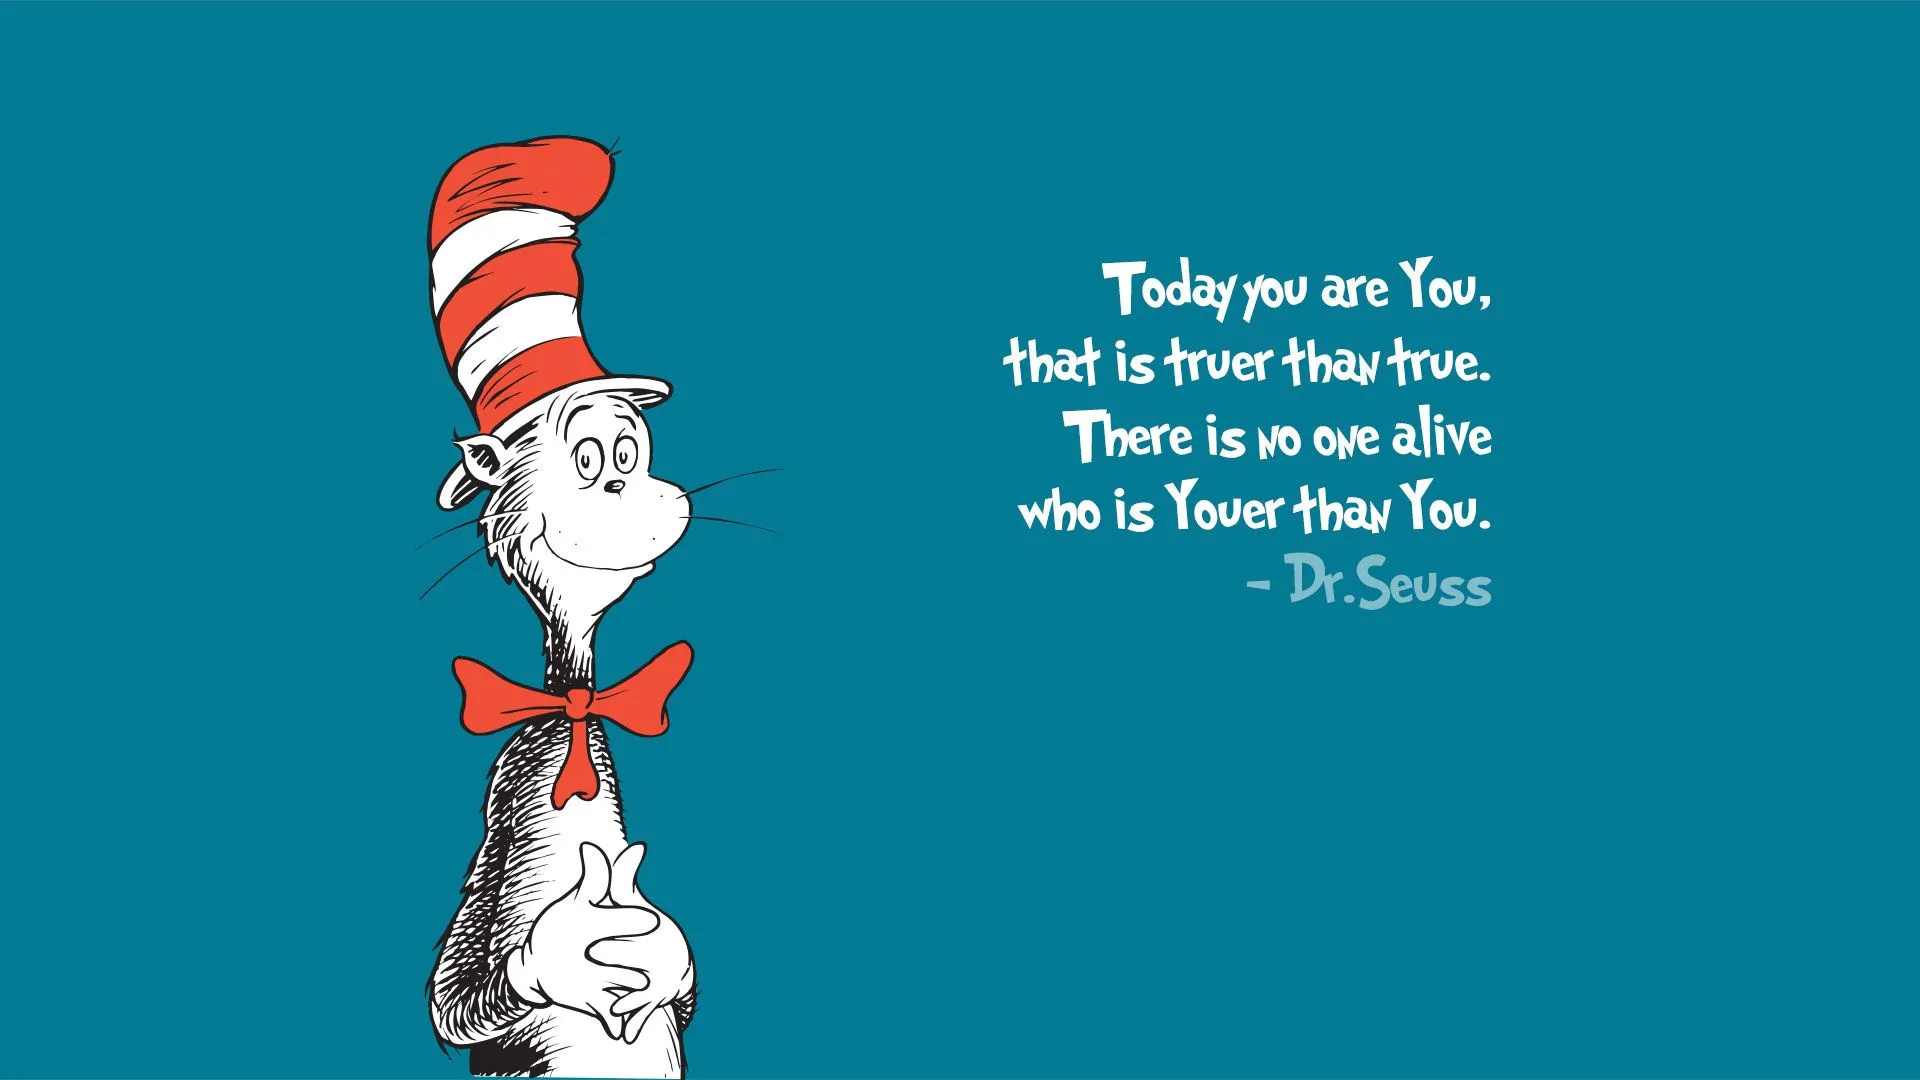 Great Cat in the Hat Quotes and Lines